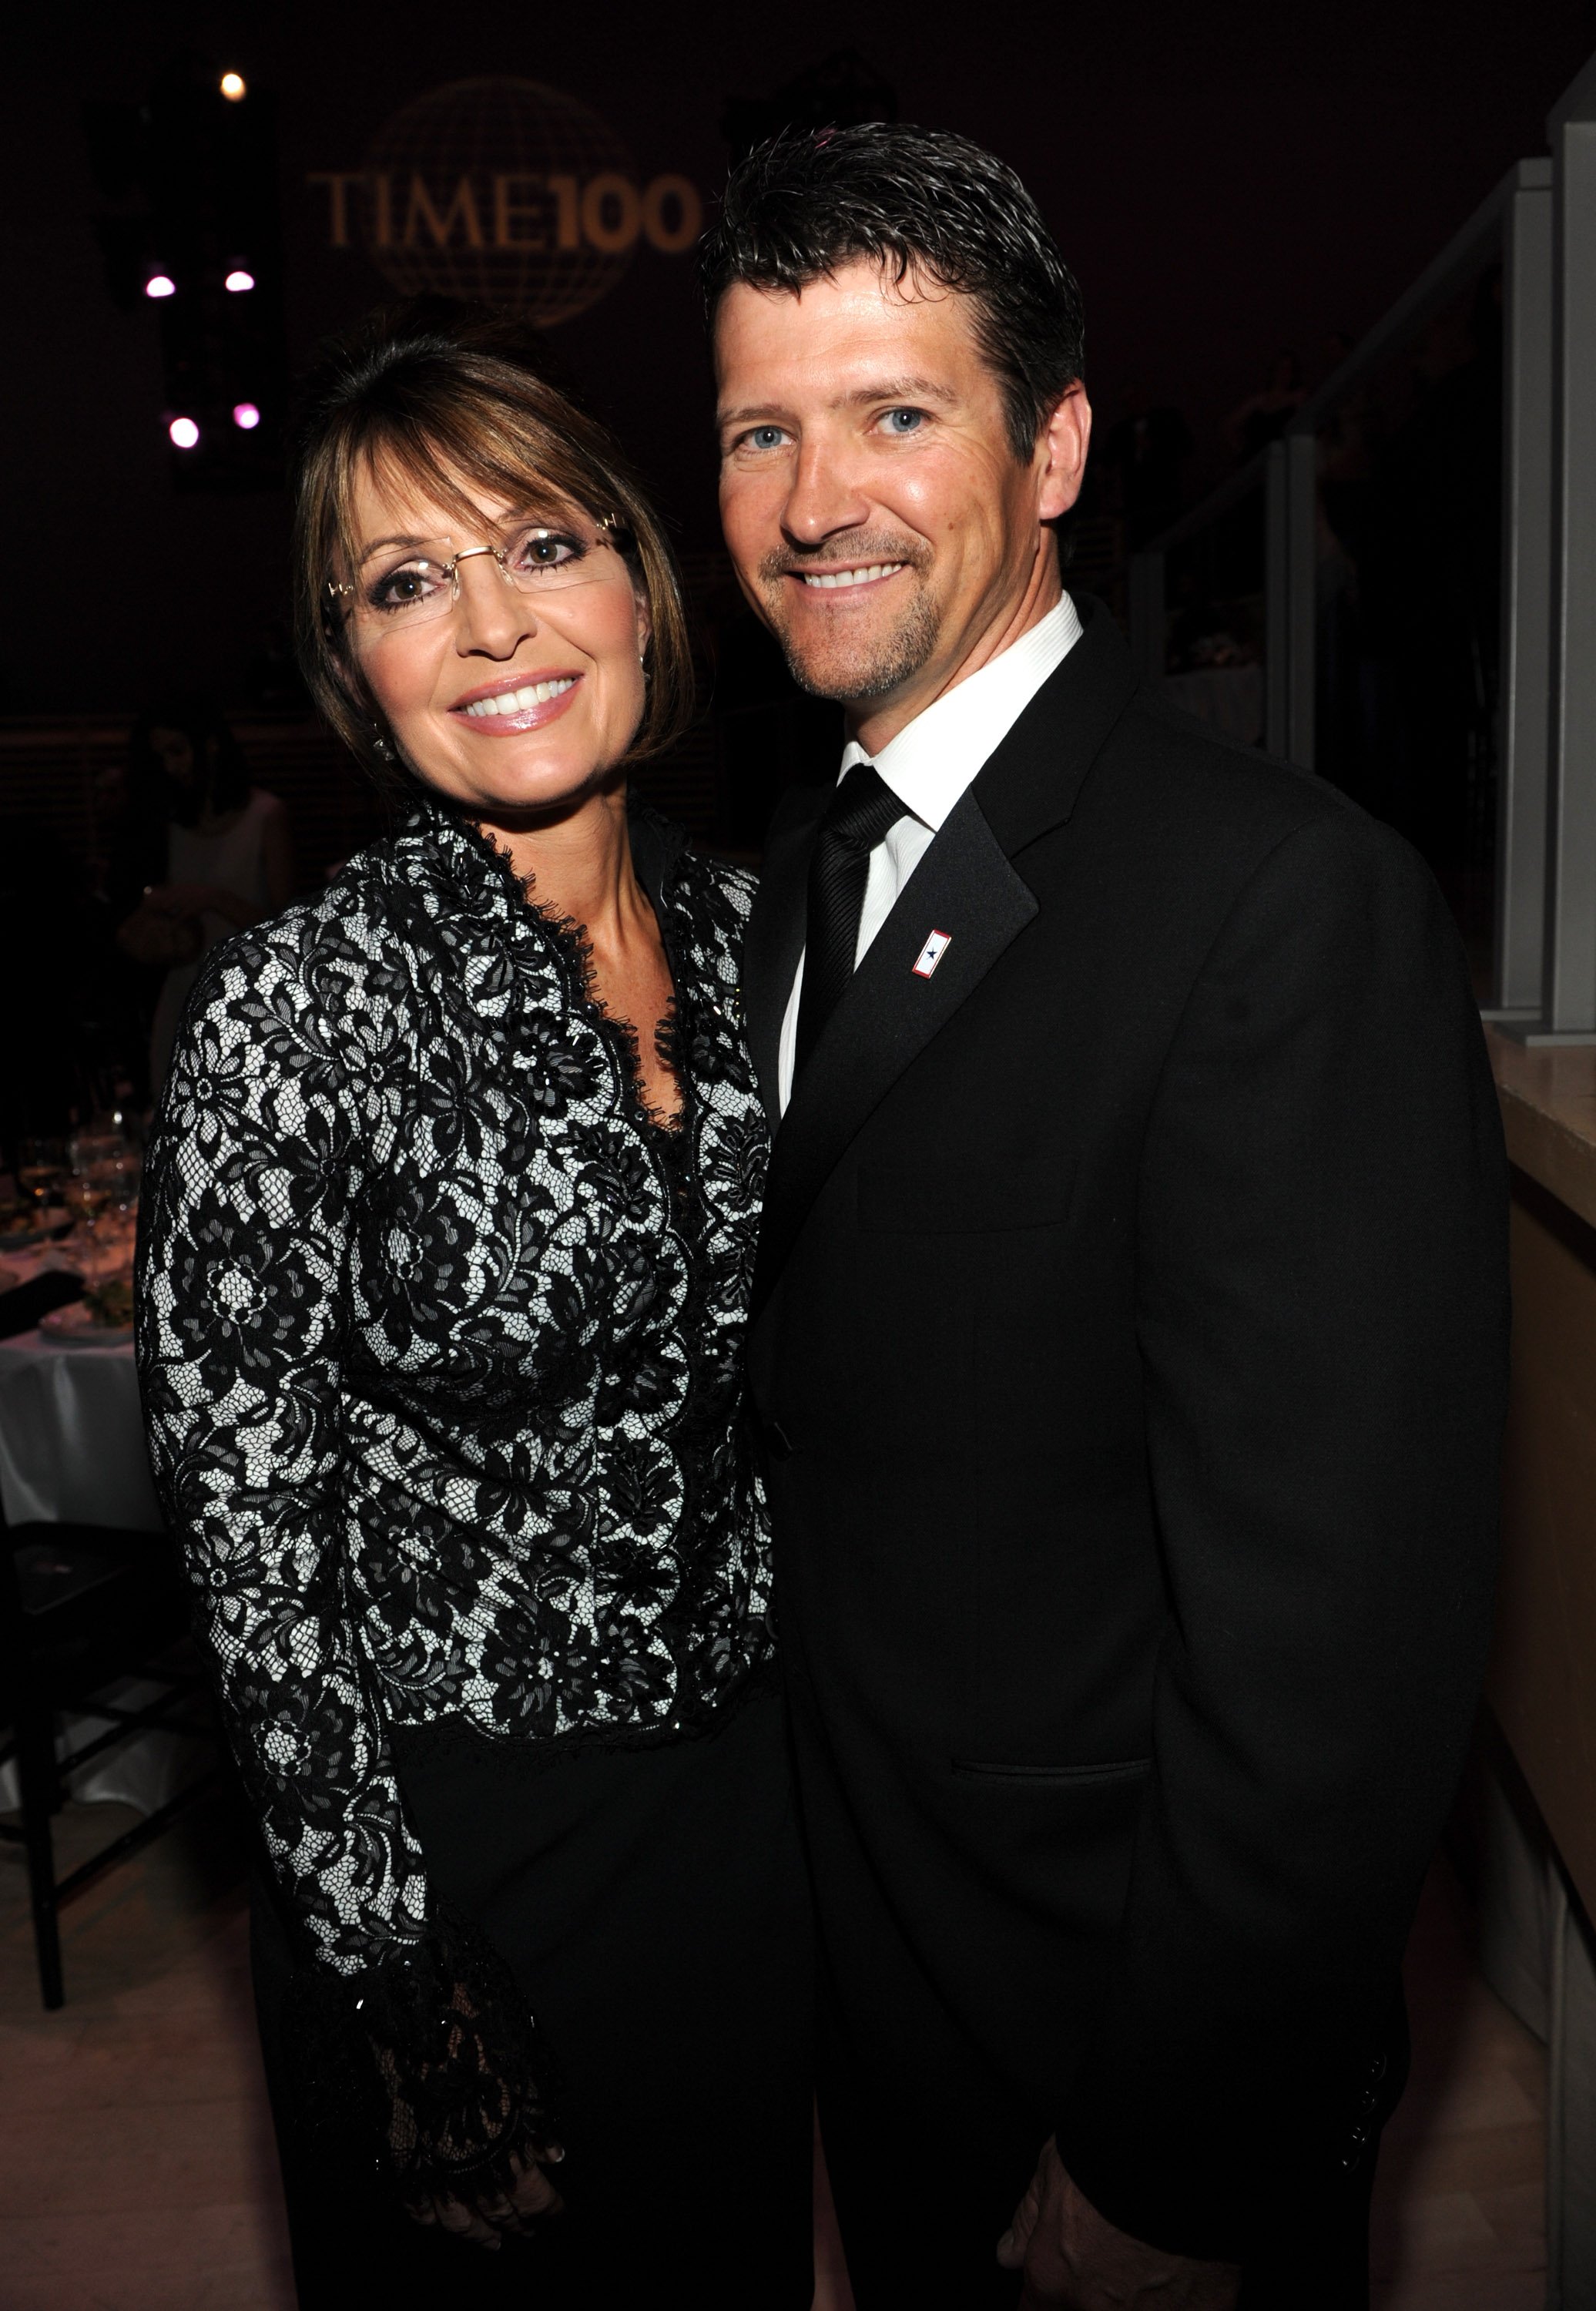 Sarah Palin and Todd Palin at Frederick P. Rose Hall, Jazz at Lincoln Center on May 4, 2010, in New York City. | Photo: Getty Images.